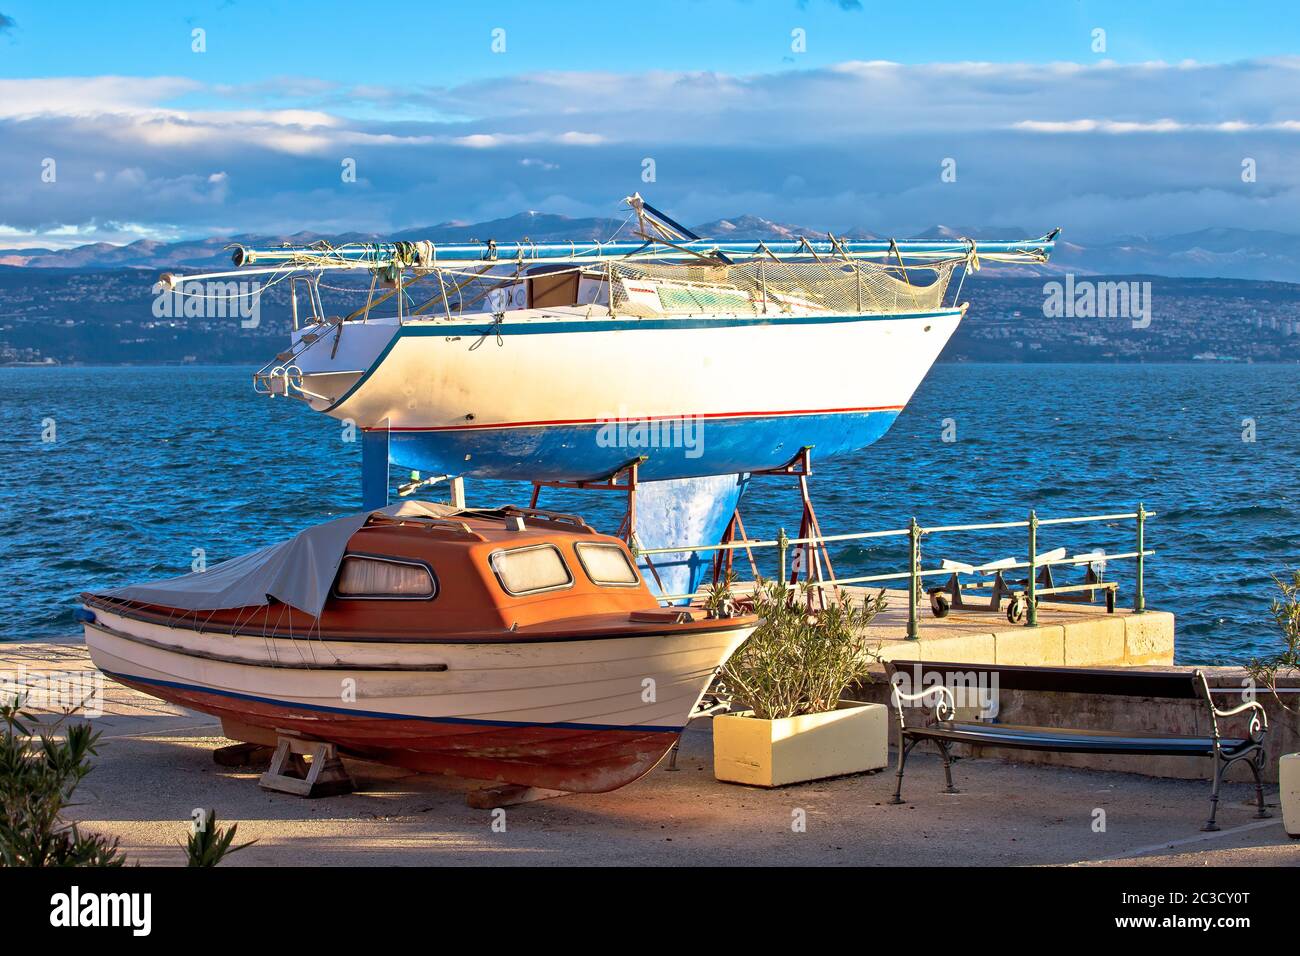 Sailboat and small boat on dry dock by the sea Stock Photo